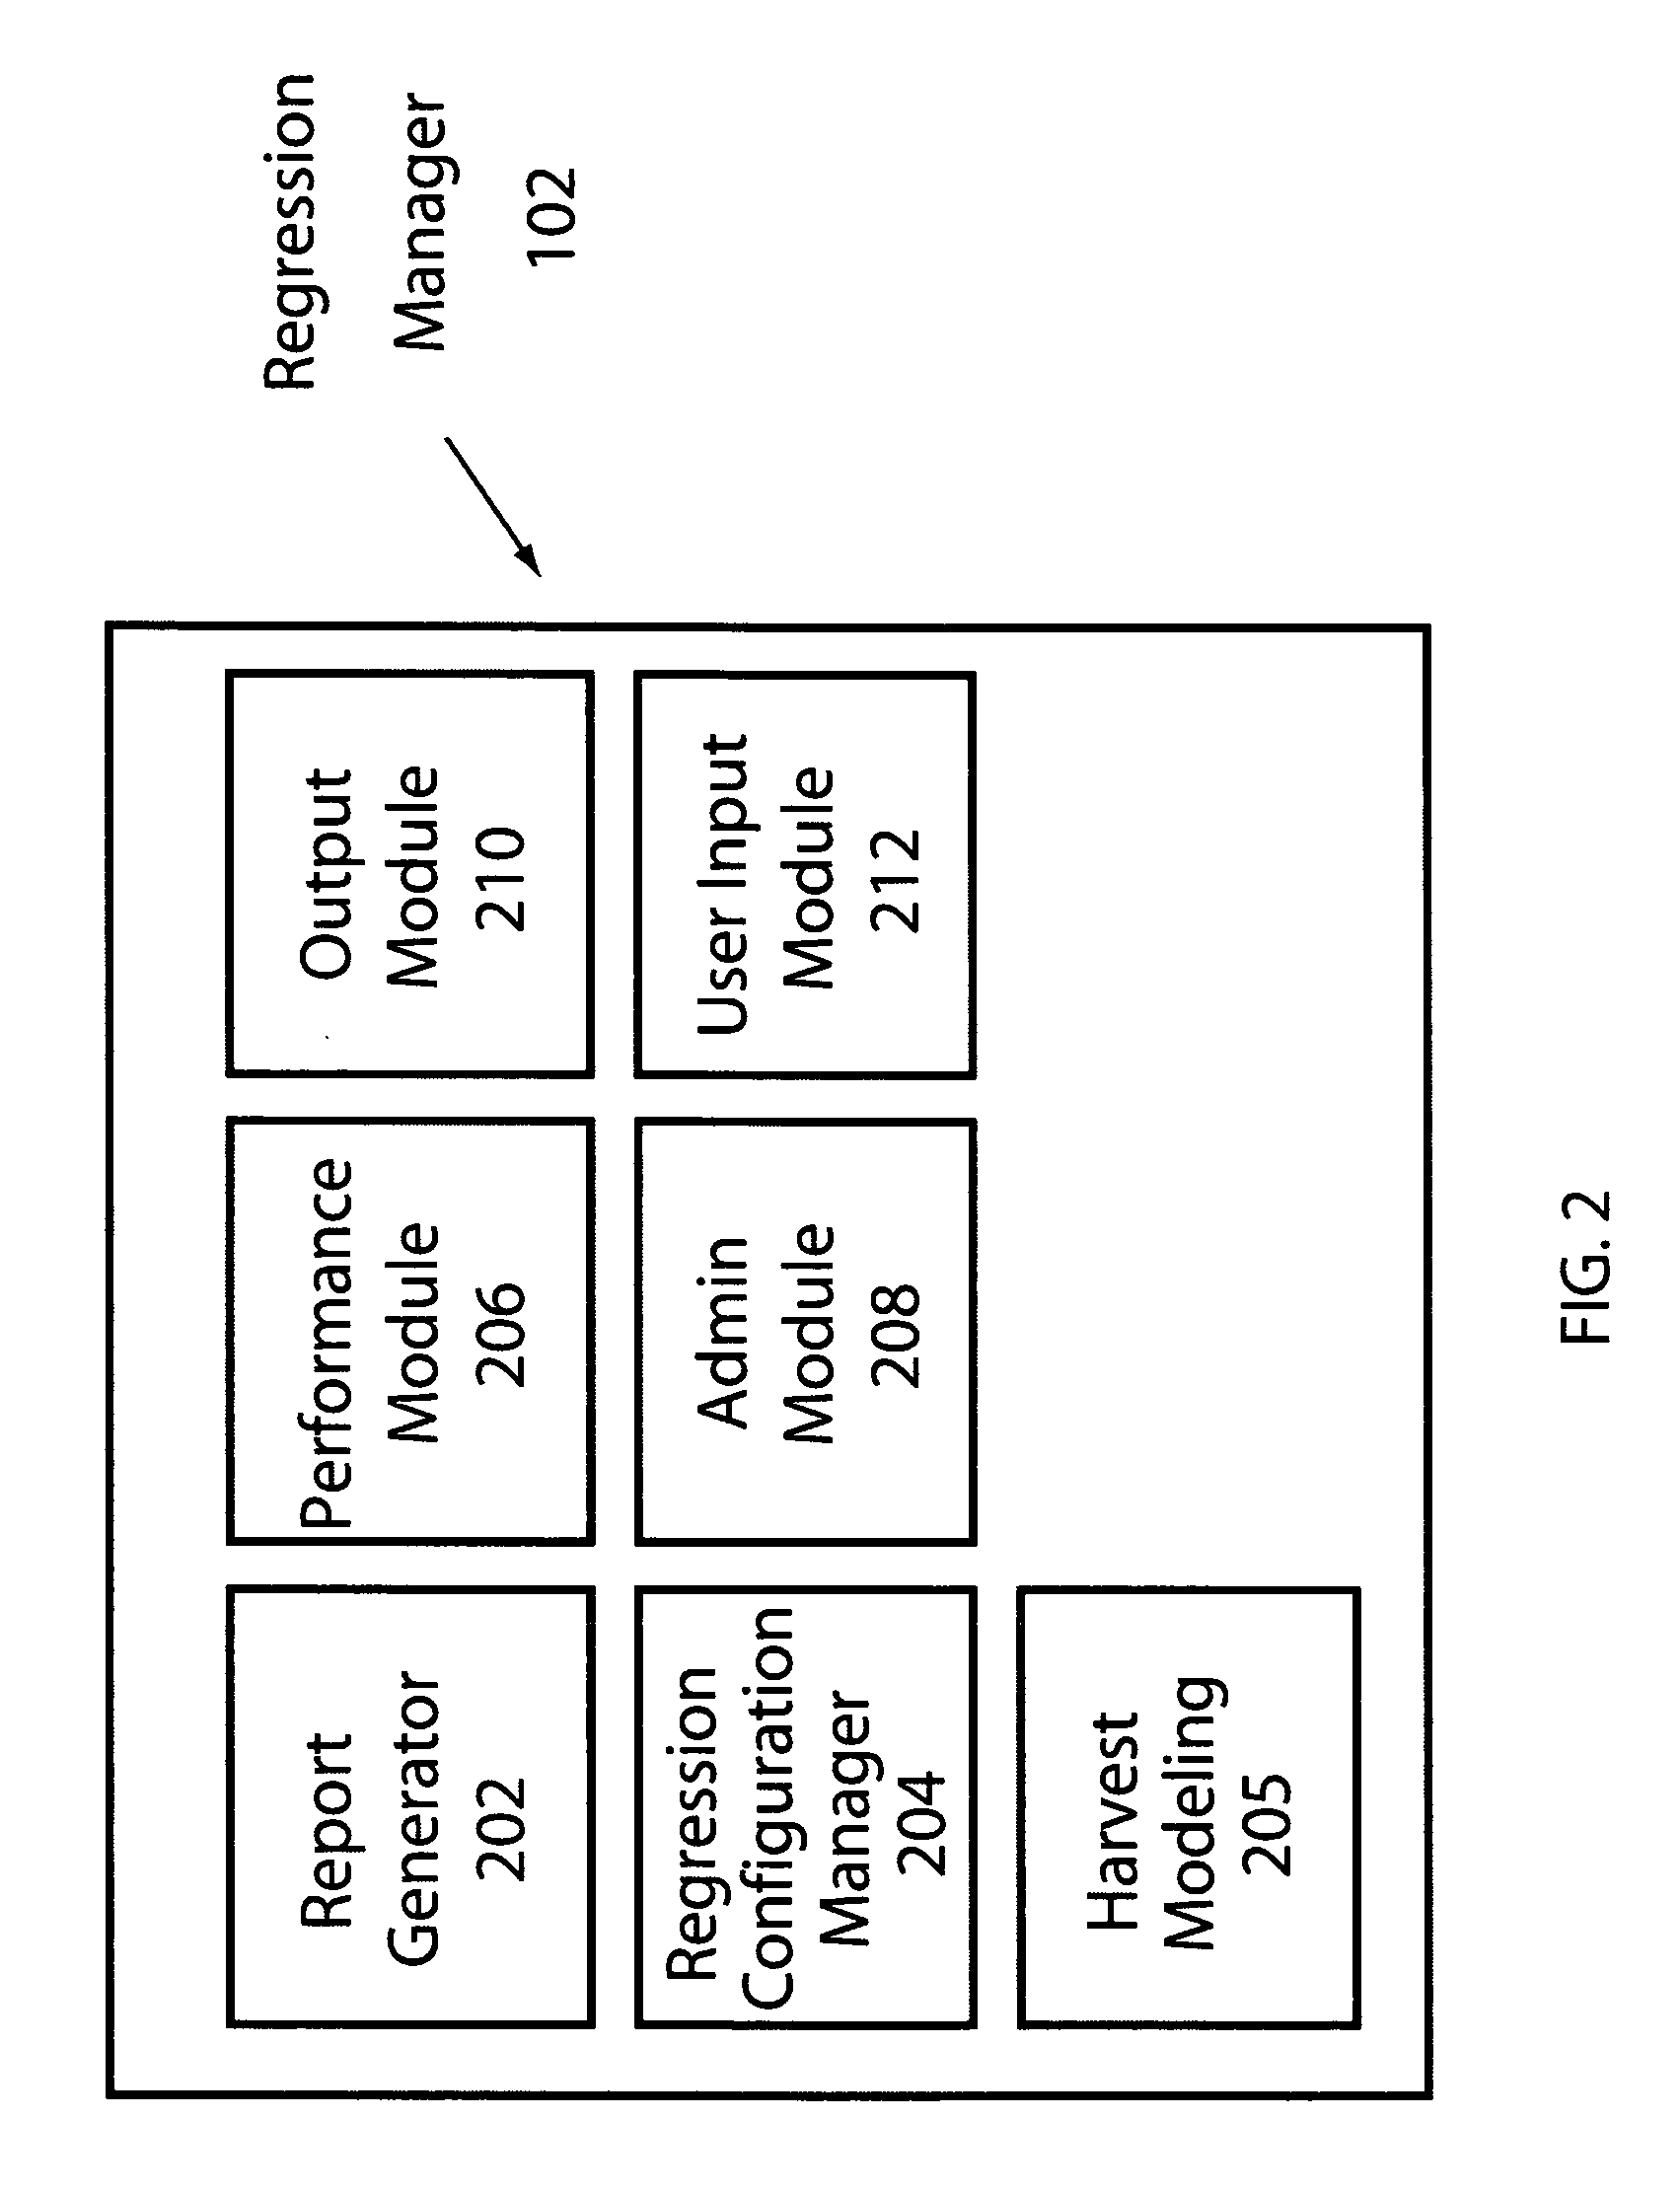 Methods, systems, and media for generating a regression suite database